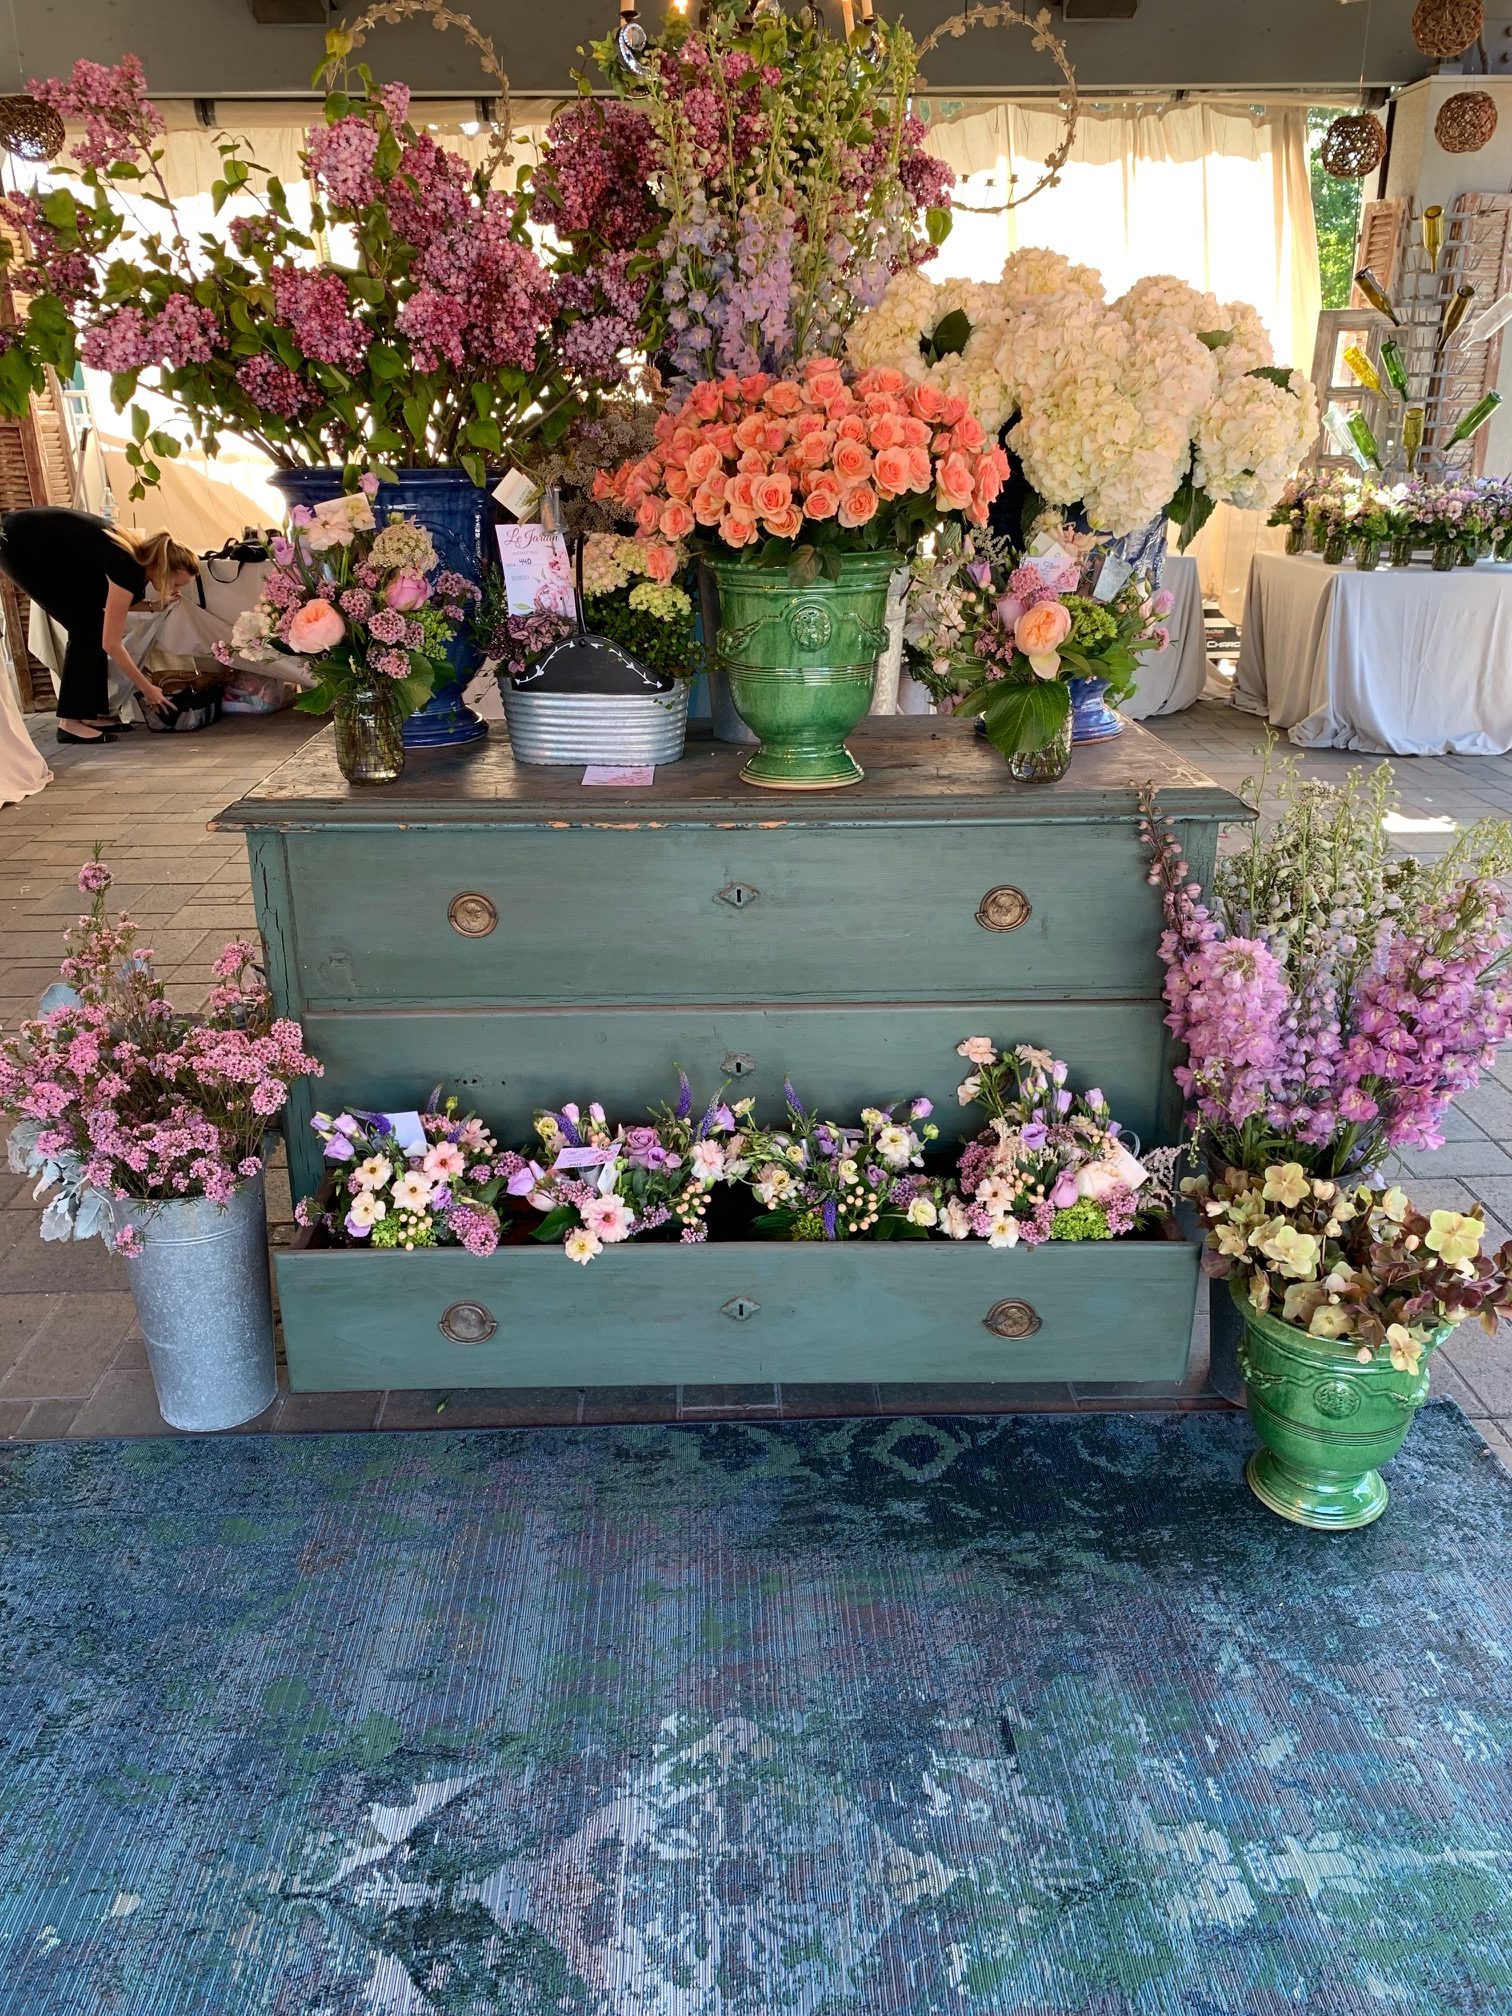 An image of various sorted flowers displayed on a teal chested draws